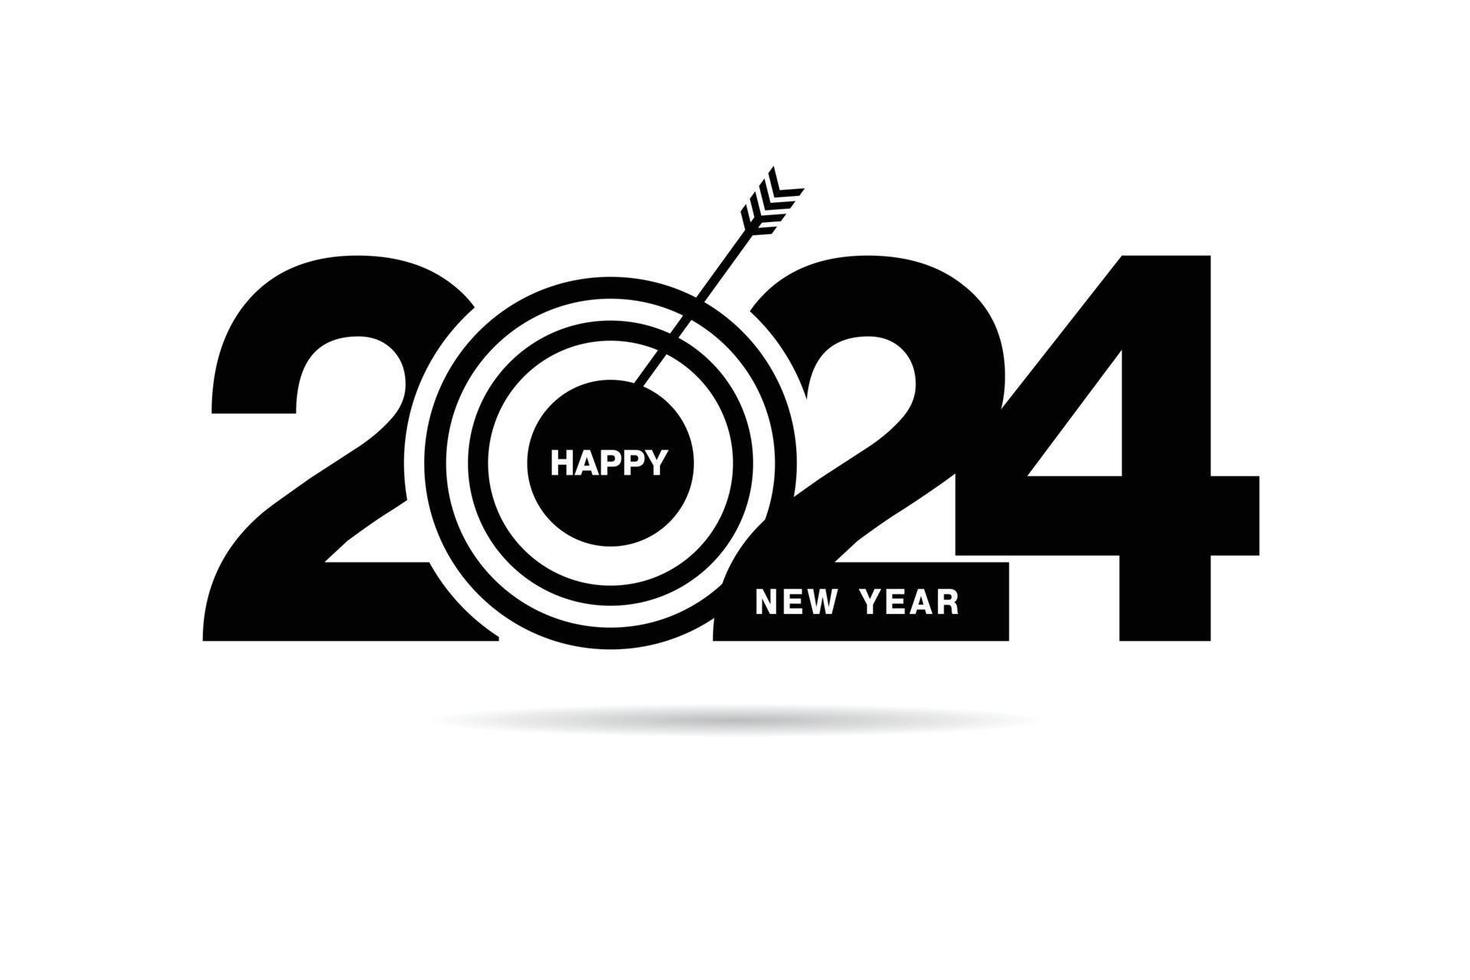 Happy New Year 2024 text design. for Brochure design template, card, banner. Vector illustration. Isolated on white background. Concept for future success and planning towards goals.